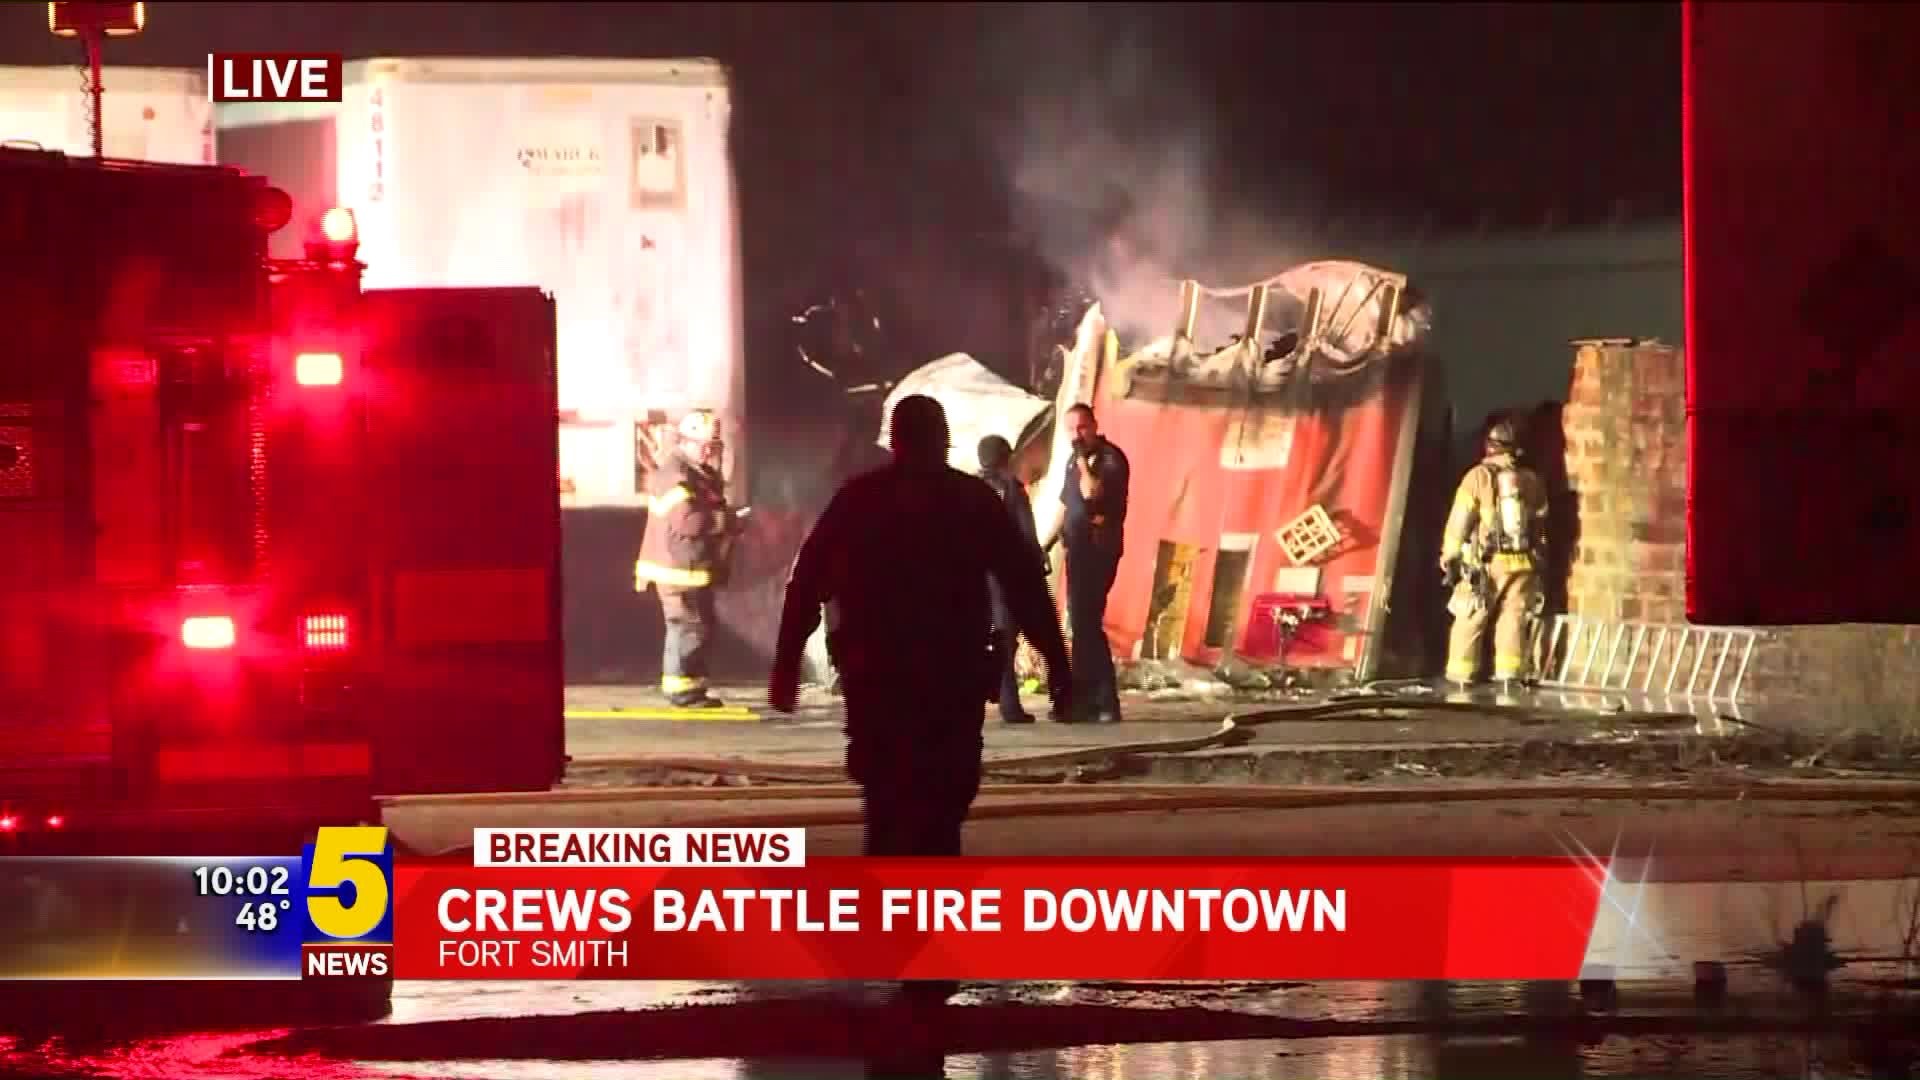 Crews Battle Fire Downtown Fort Smith